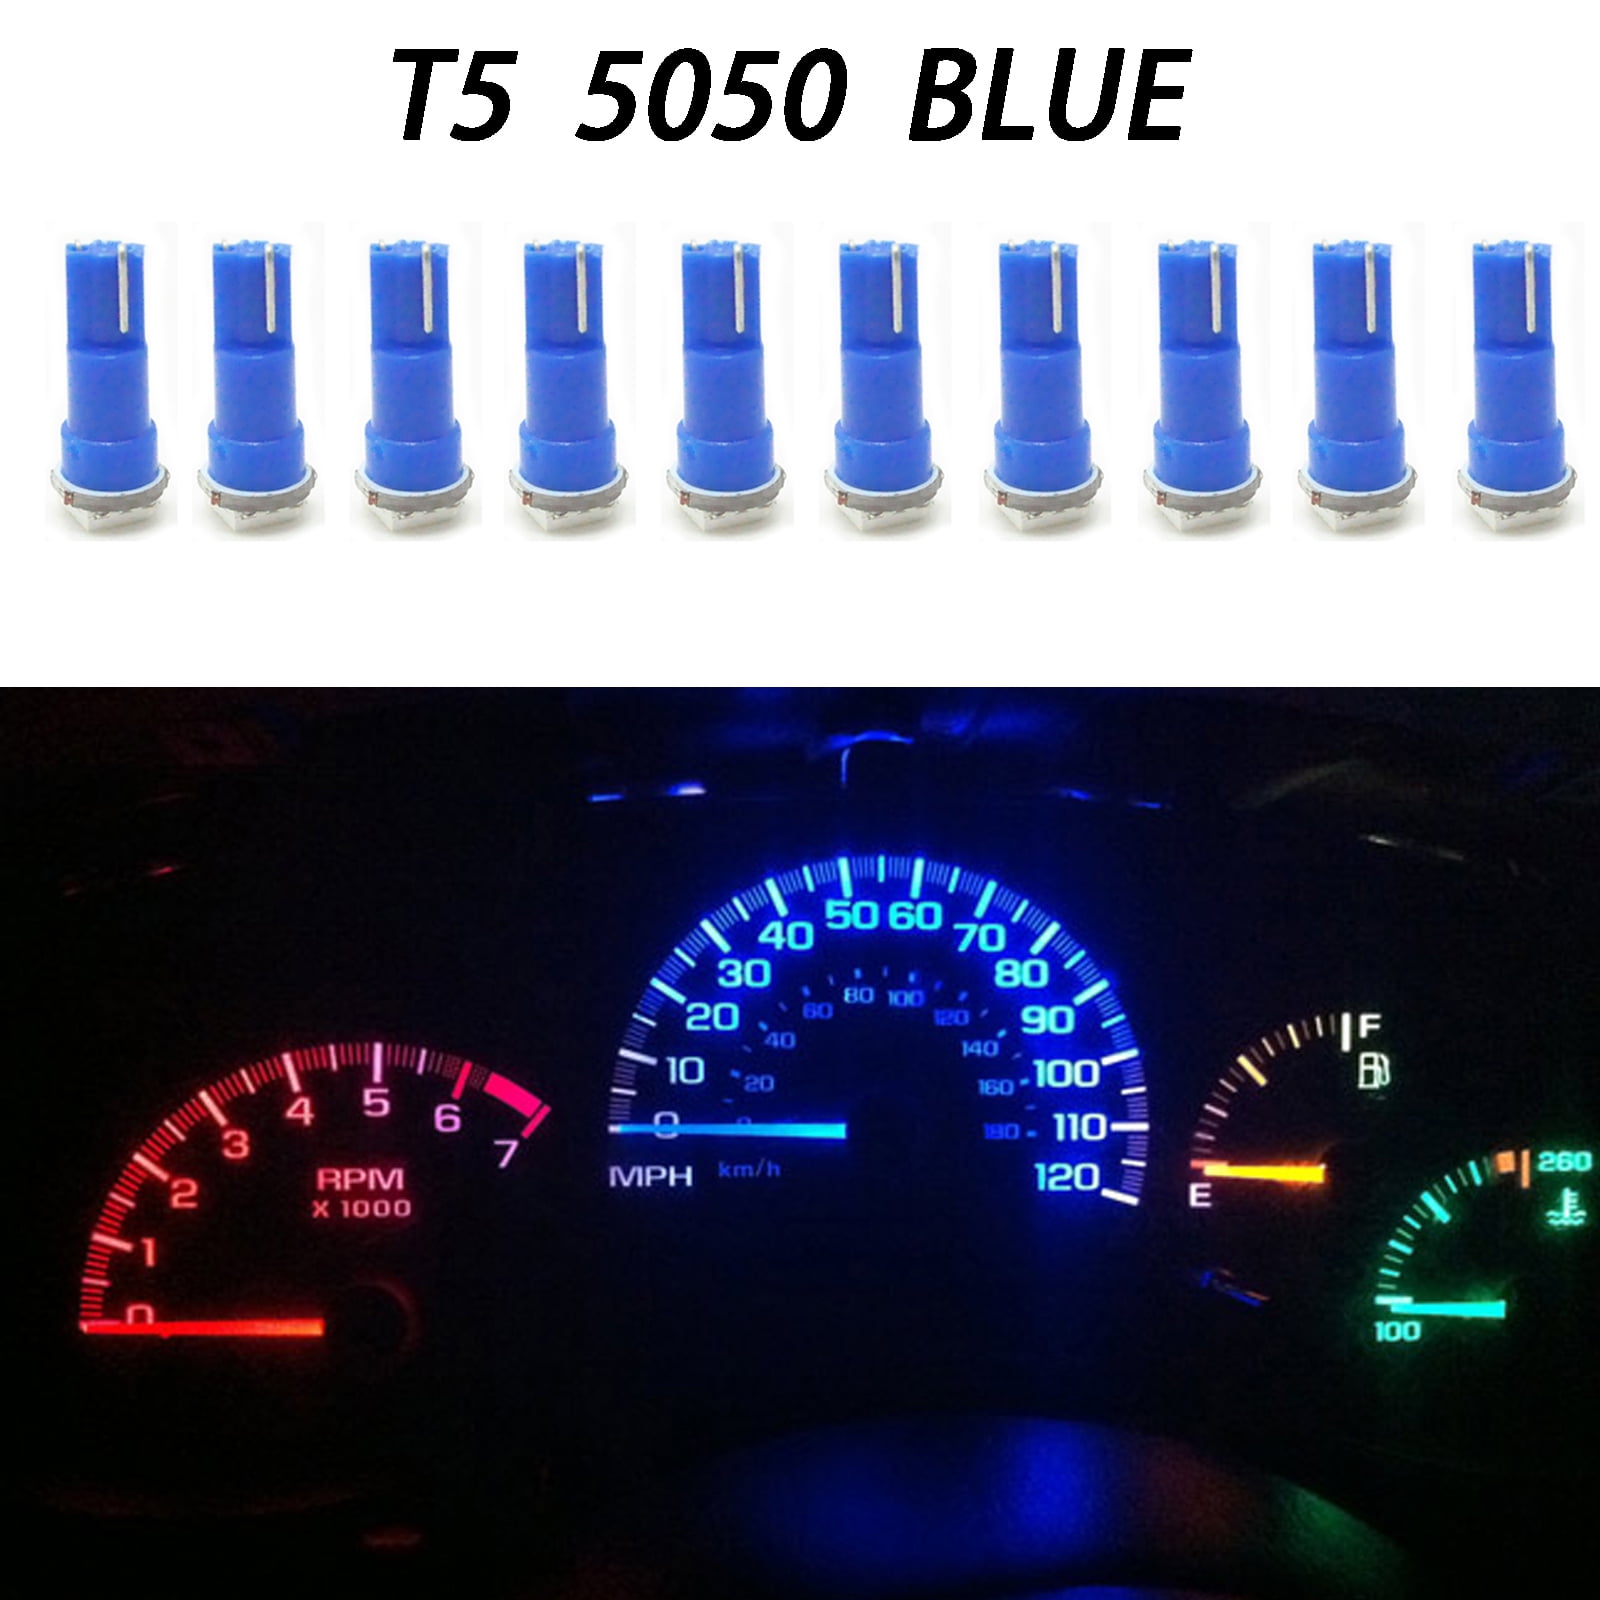 cciyu 20 Pack Blue T5 3-3014 SMD Wedge LED Light Bulbs 74 17 18 37 70 73 2721 Replacement fit for Instrumental Cluster Gauge Dashboard